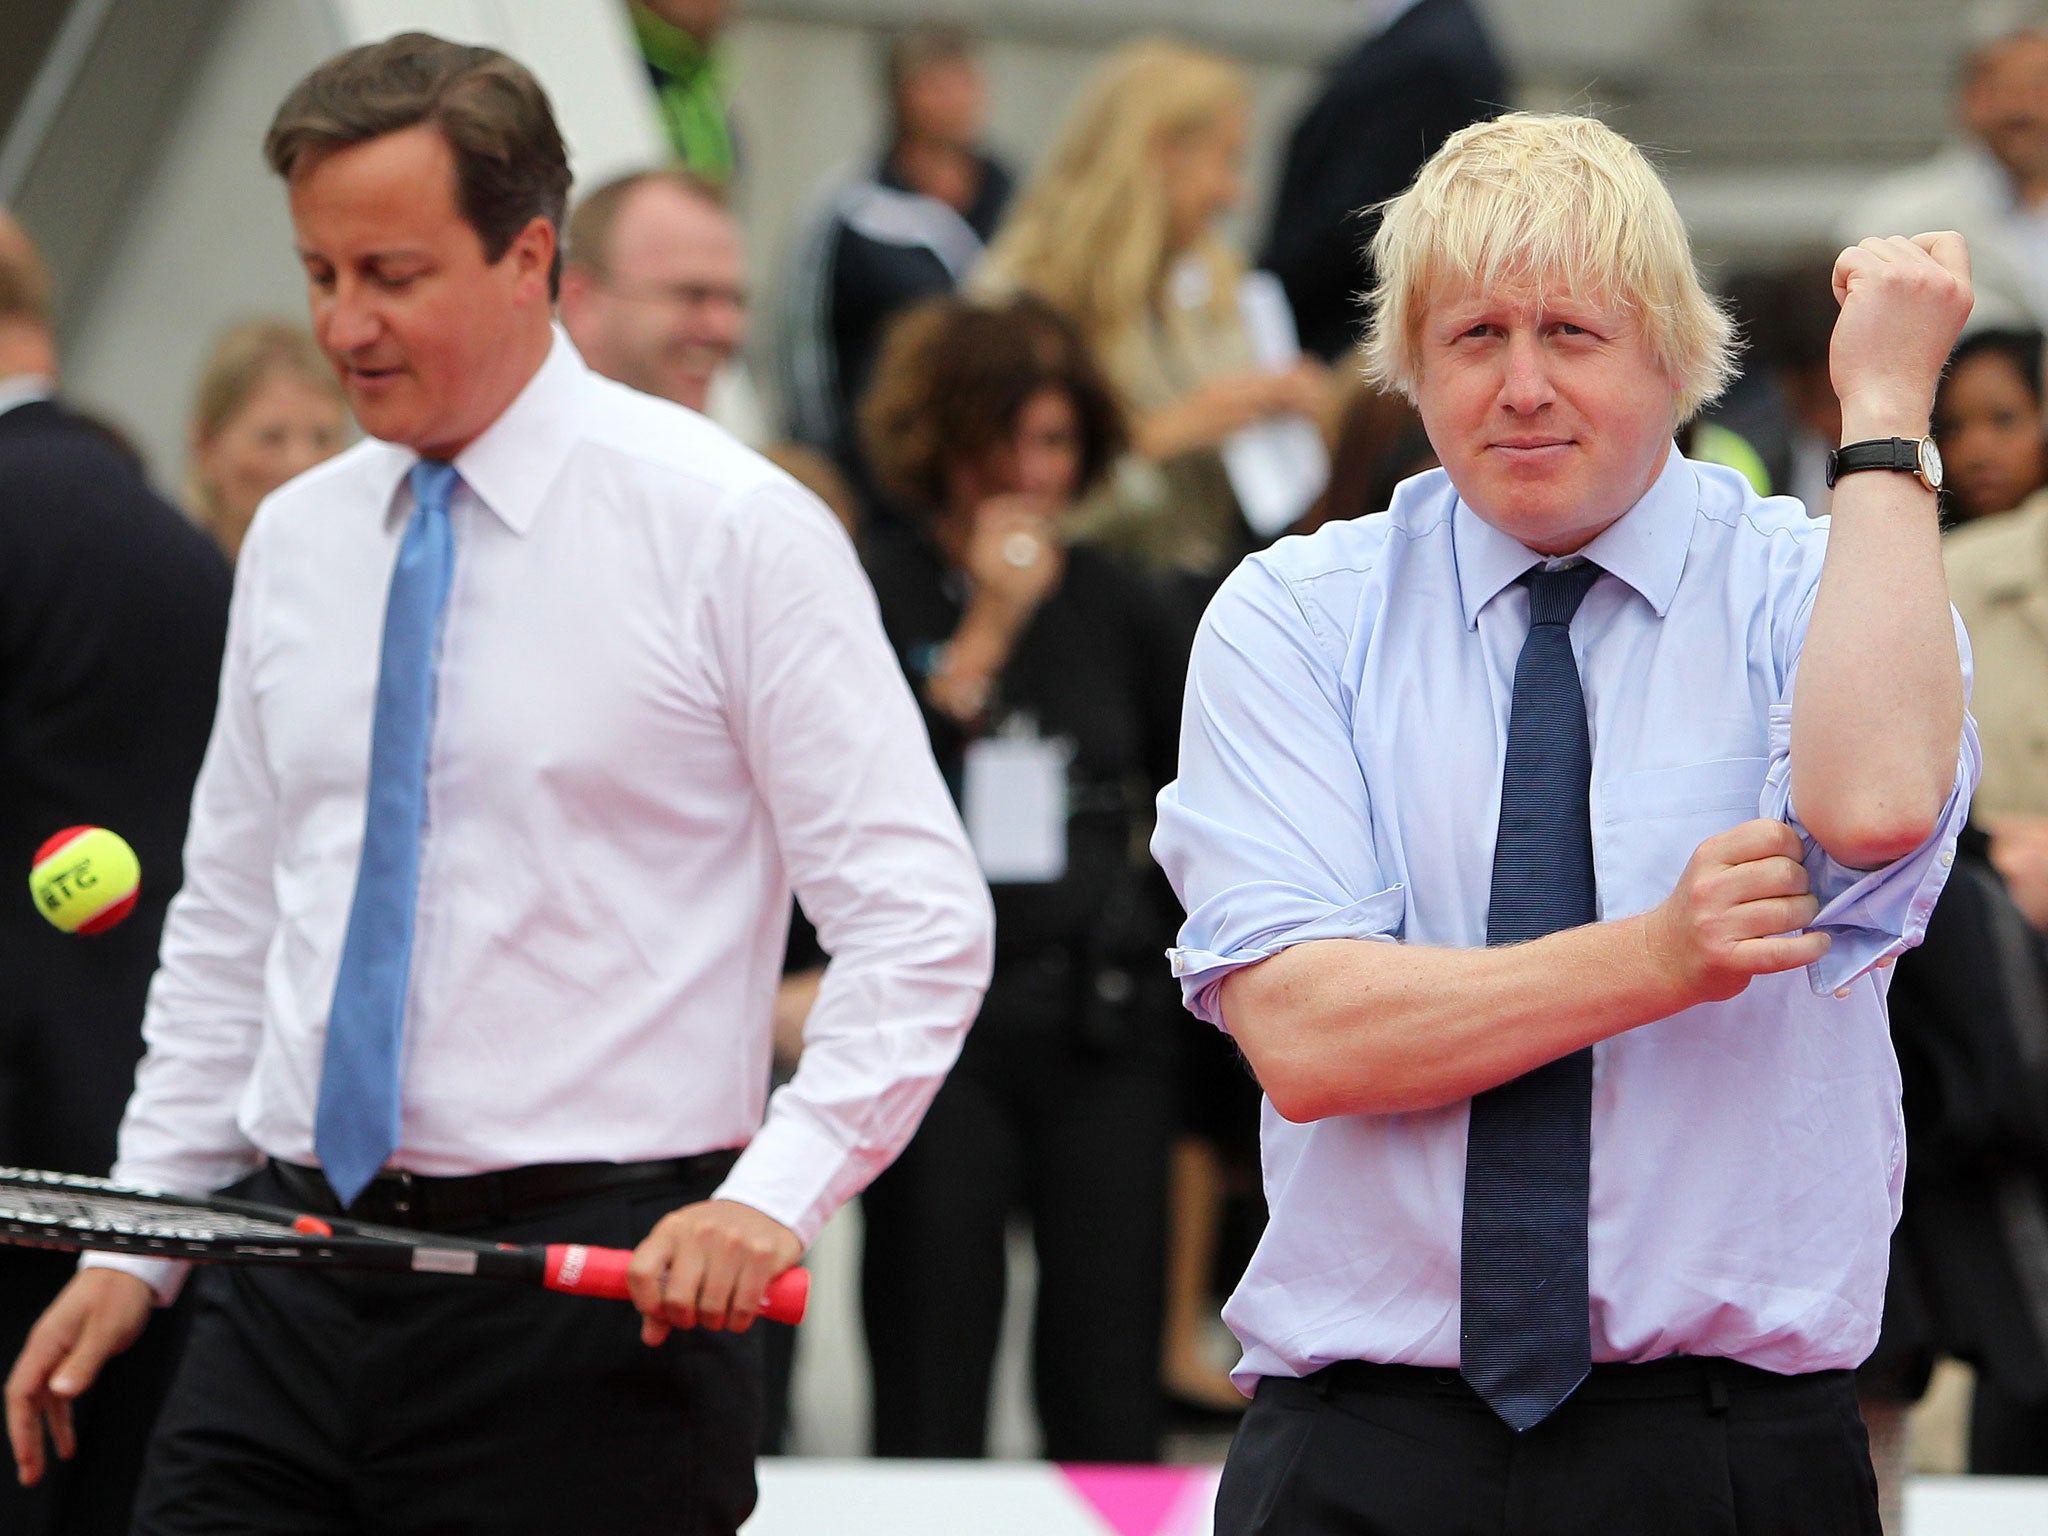 A tennis match between the Prime Minister and the Mayor of London is to go ahead, said the Justice Secretary